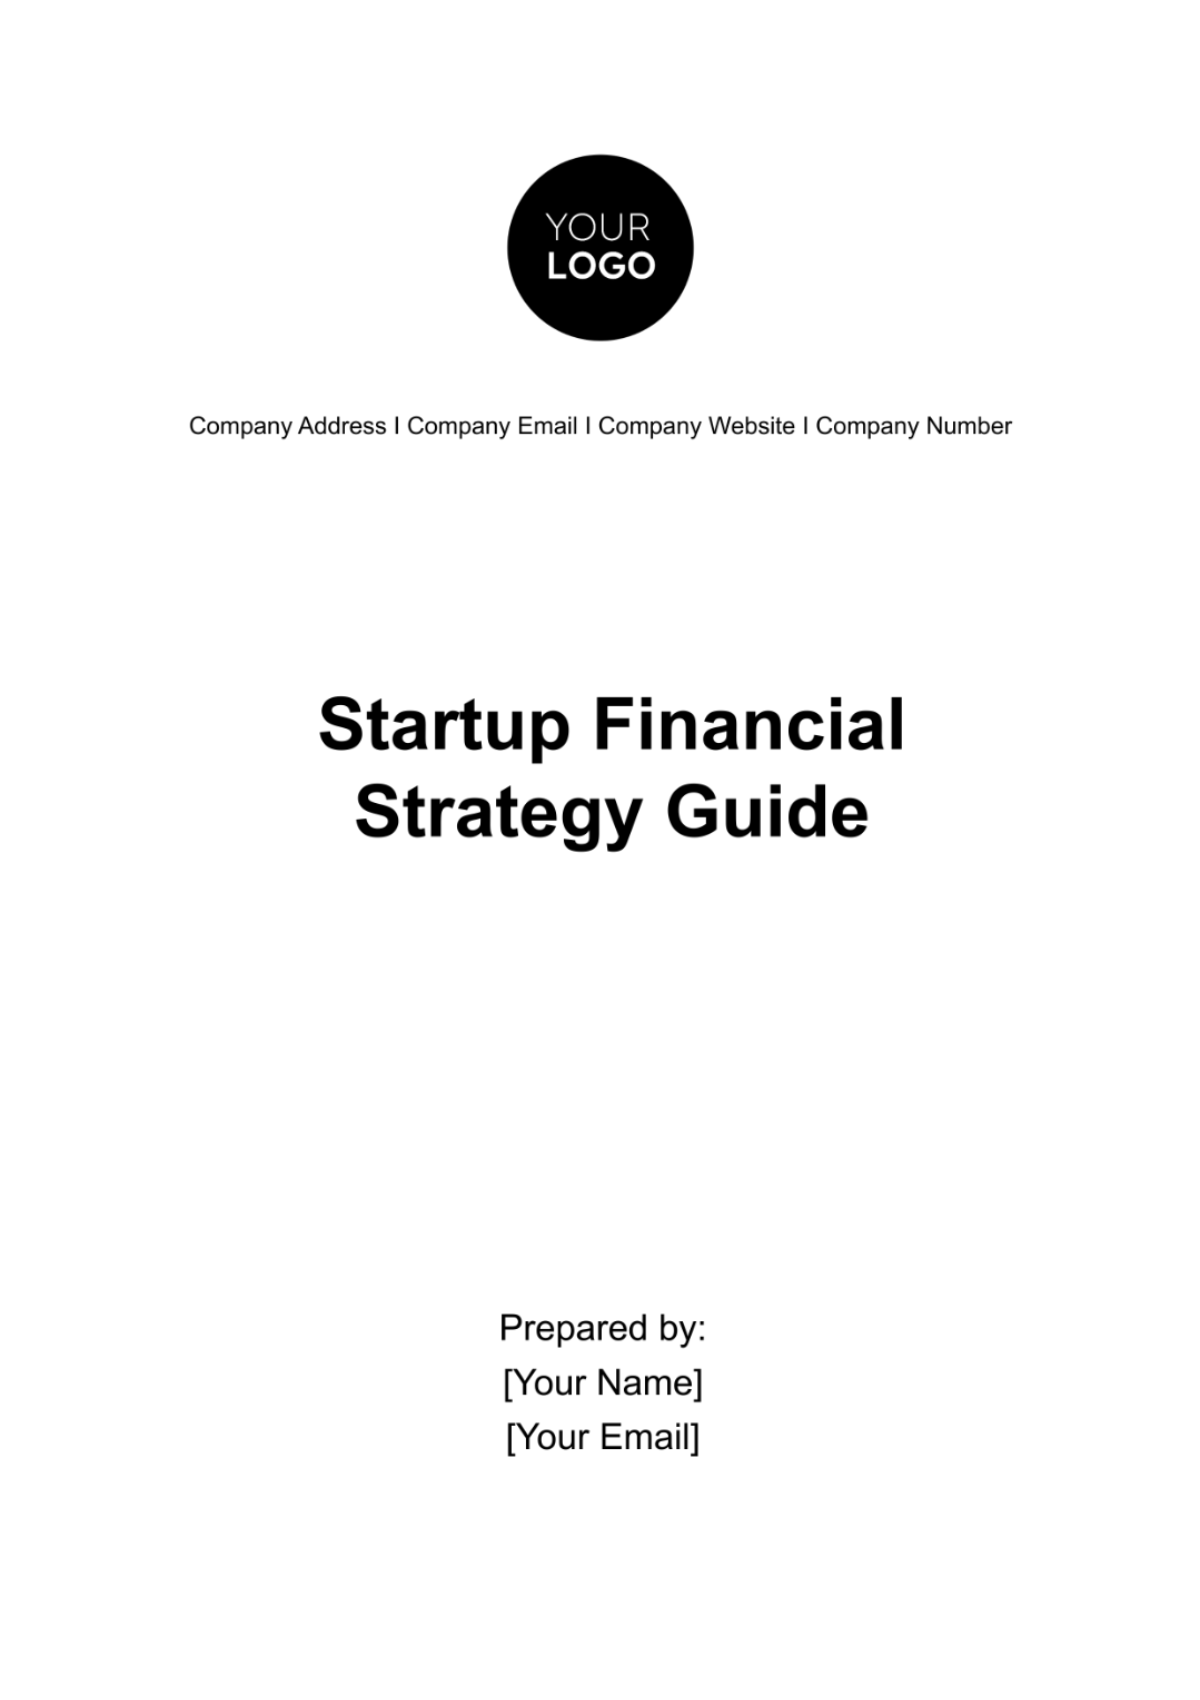 Startup Financial Strategy Guide Template